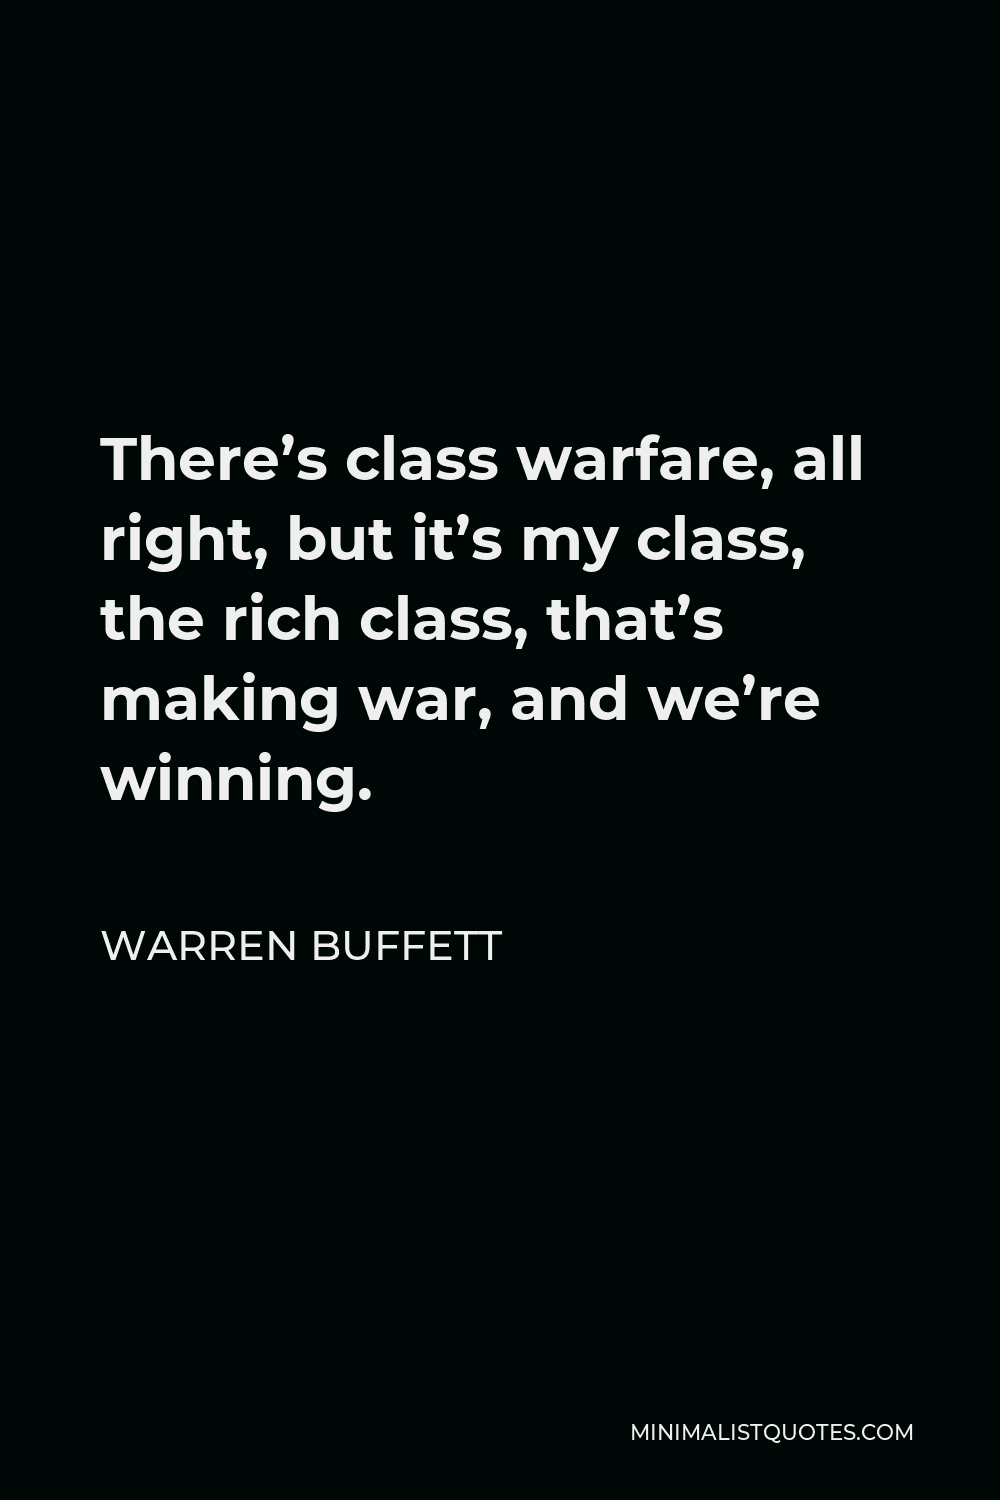 Warren Buffett Quote: There’s class warfare, all right, but it’s my class, the rich class, that’s making war, and we’re winning.